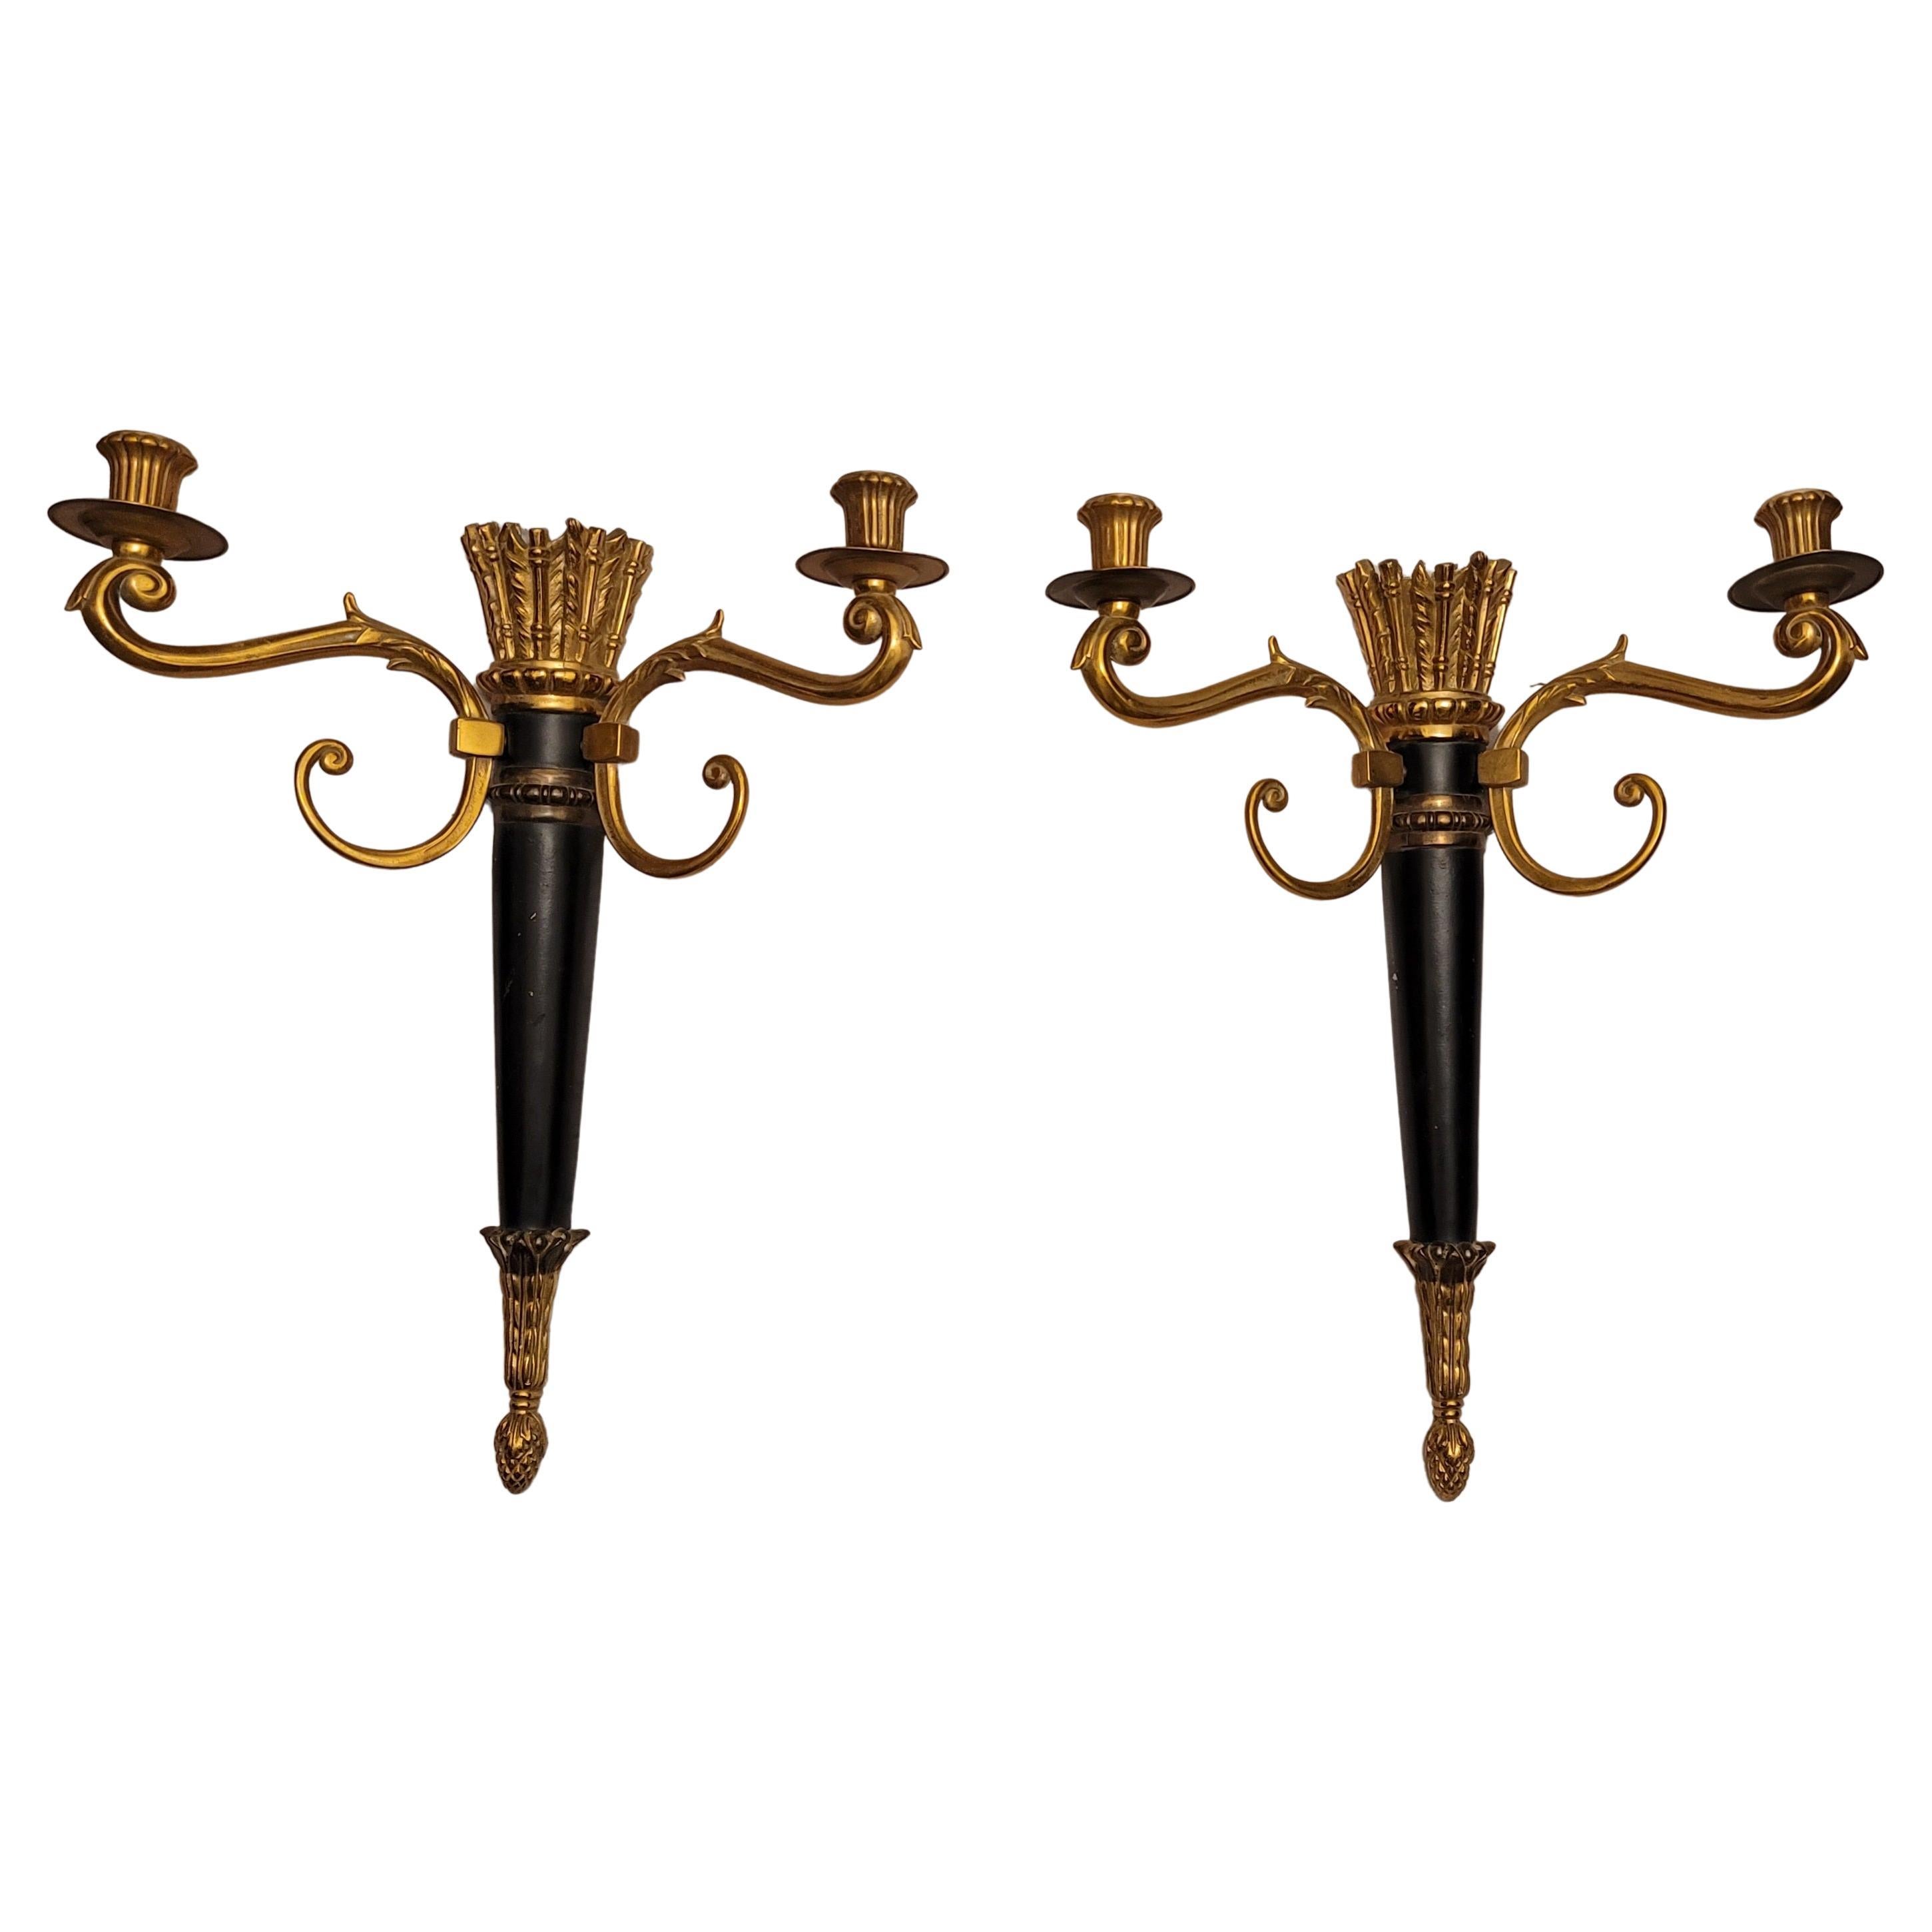 Pair of French Empire Ebonized Parcel Gilt Bronze Candle Sconces In Good Condition For Sale In Germantown, MD